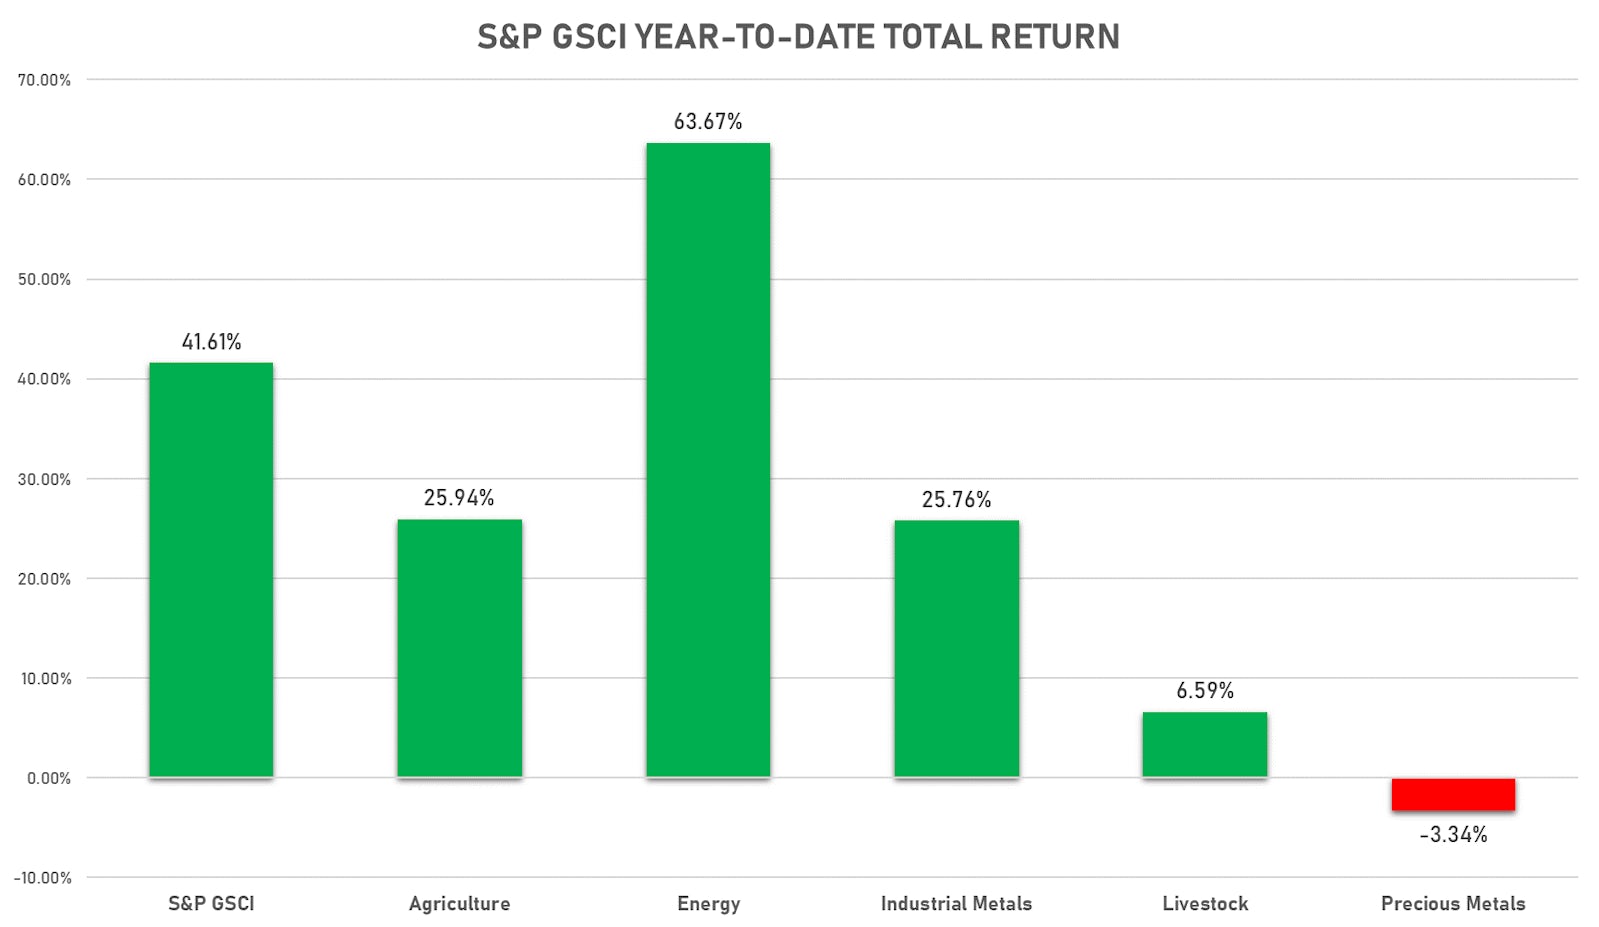 S&P GSCI Sub-Indices Year-To-Date Total Returns | Sources: ϕpost, FactSet data